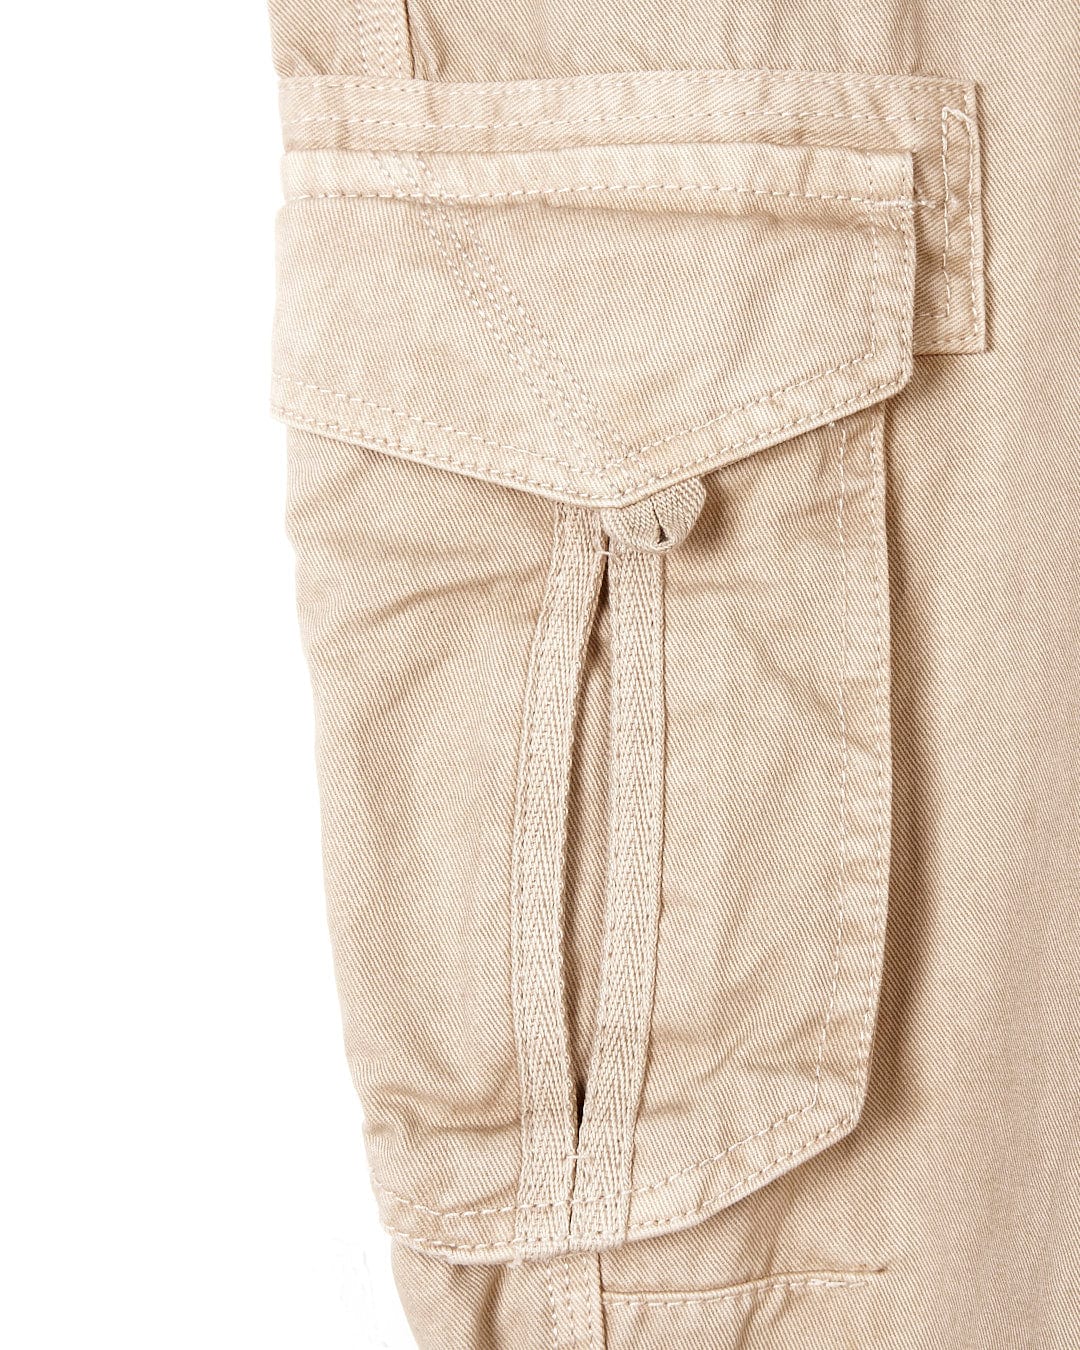 A close up of a cream cotton Godrevy cargo short by Saltrock.